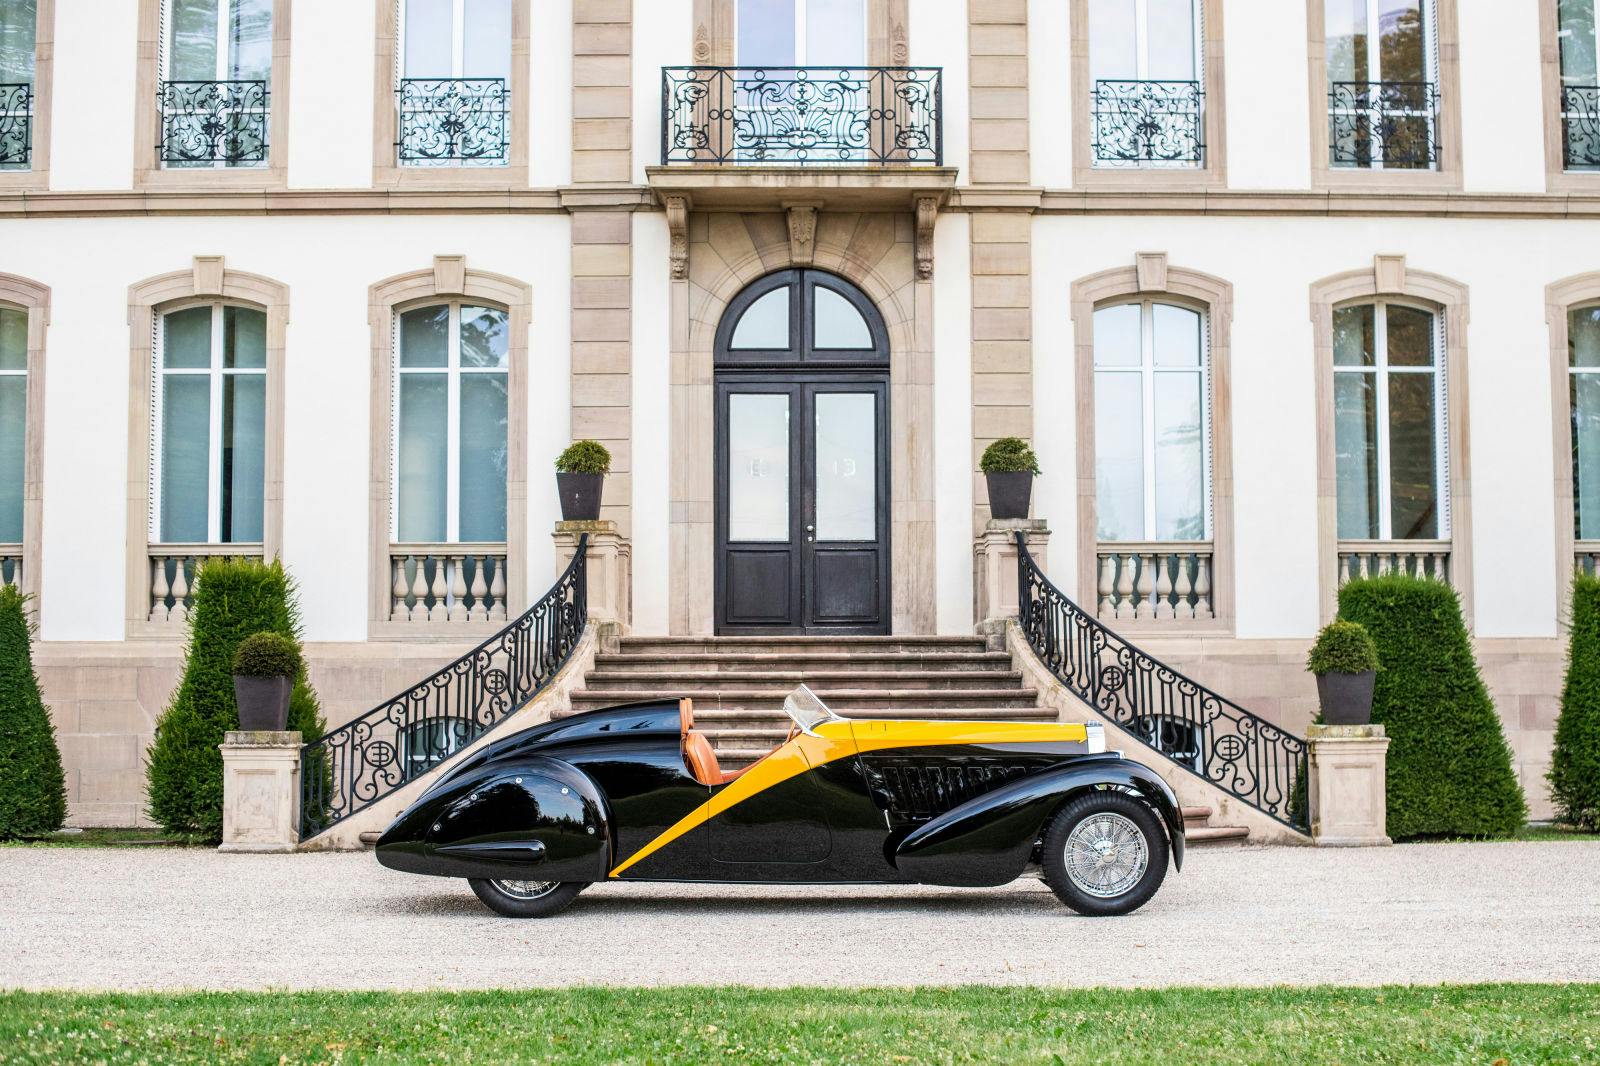 The one-of-a kind example of the Bugatti Type 57 Roadster Grand Raid Usine unveiled at the Salon de l’Automobile in Paris in October 1934.